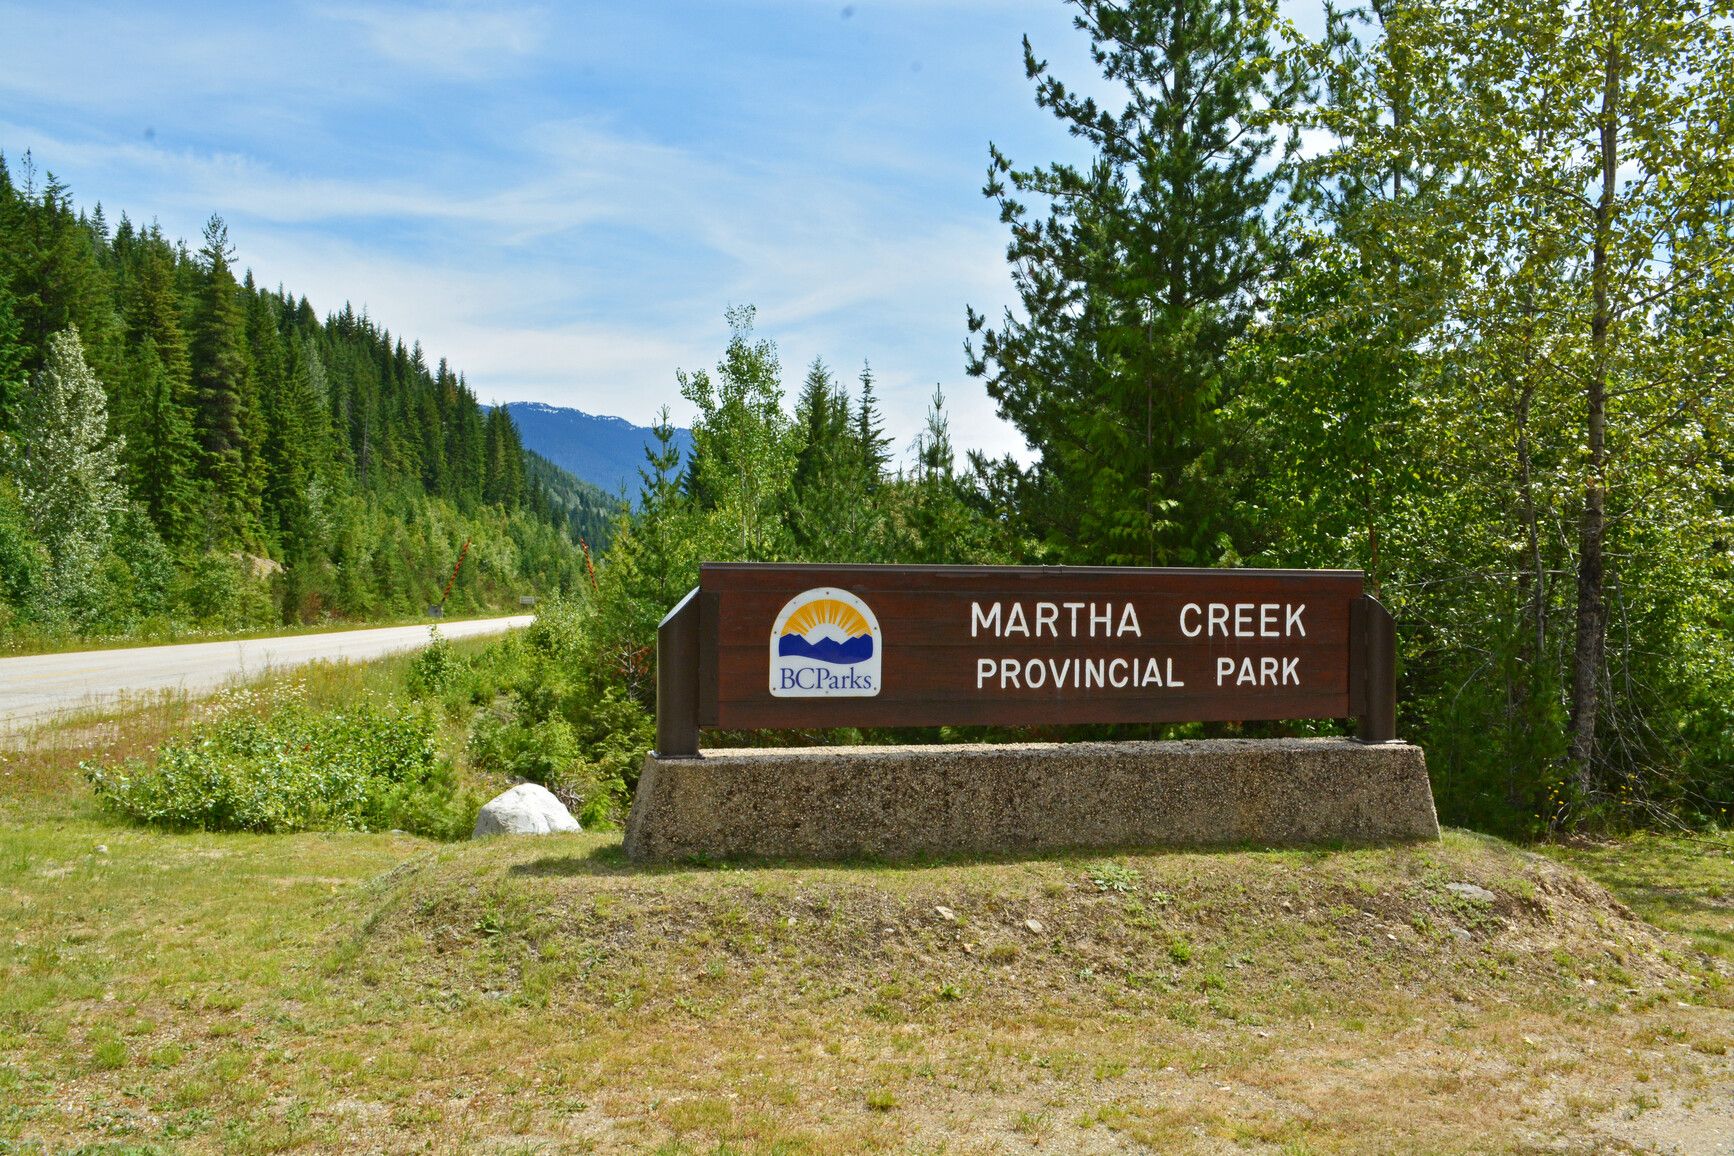 The entrance sign for Martha Creek Park beside the highway.